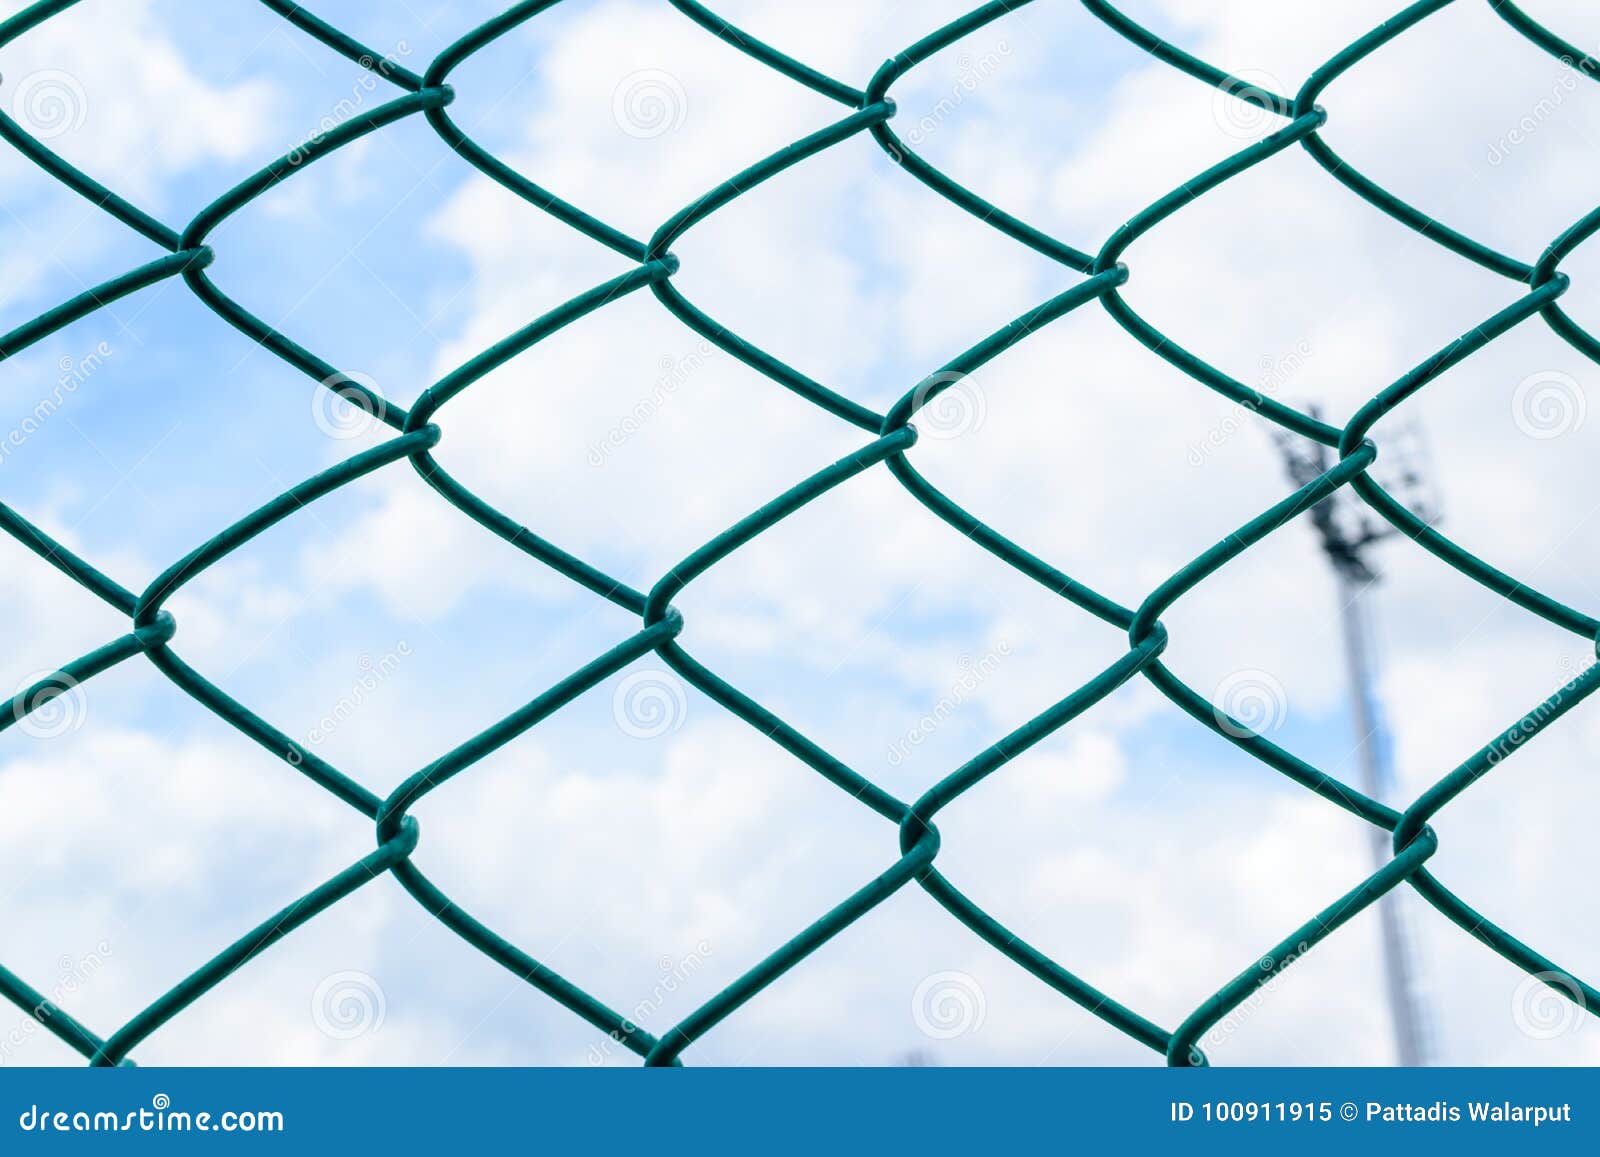 Green metal wire fence stock image. Image of mesh, against - 100911915
